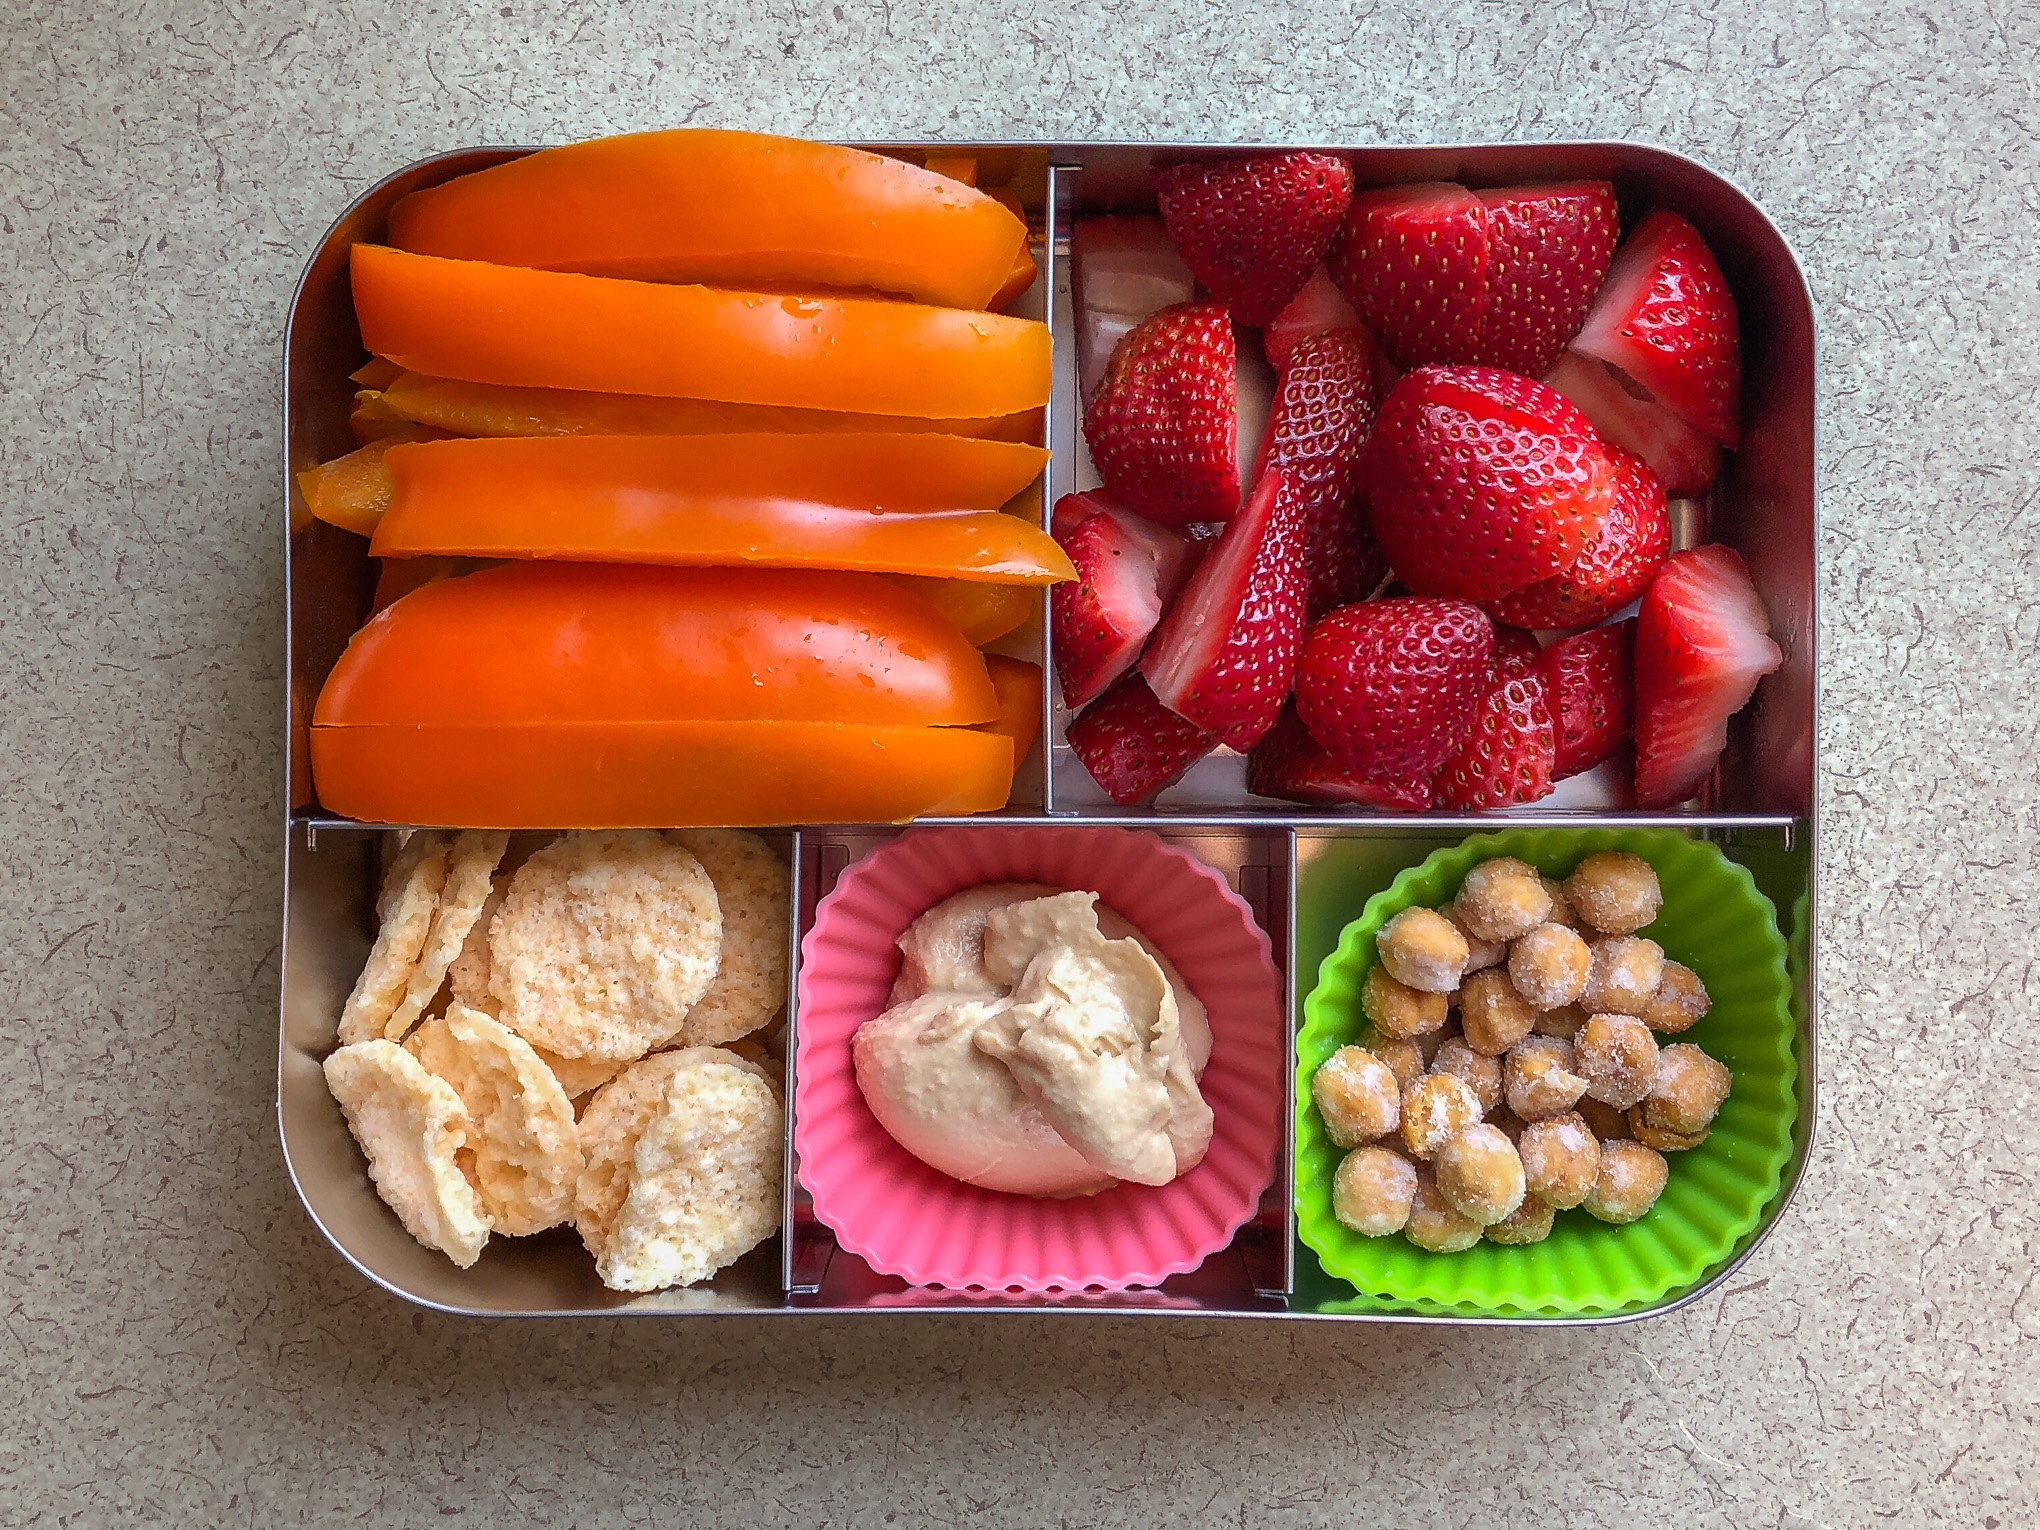 Bento box filled with bell pepper and strawberries